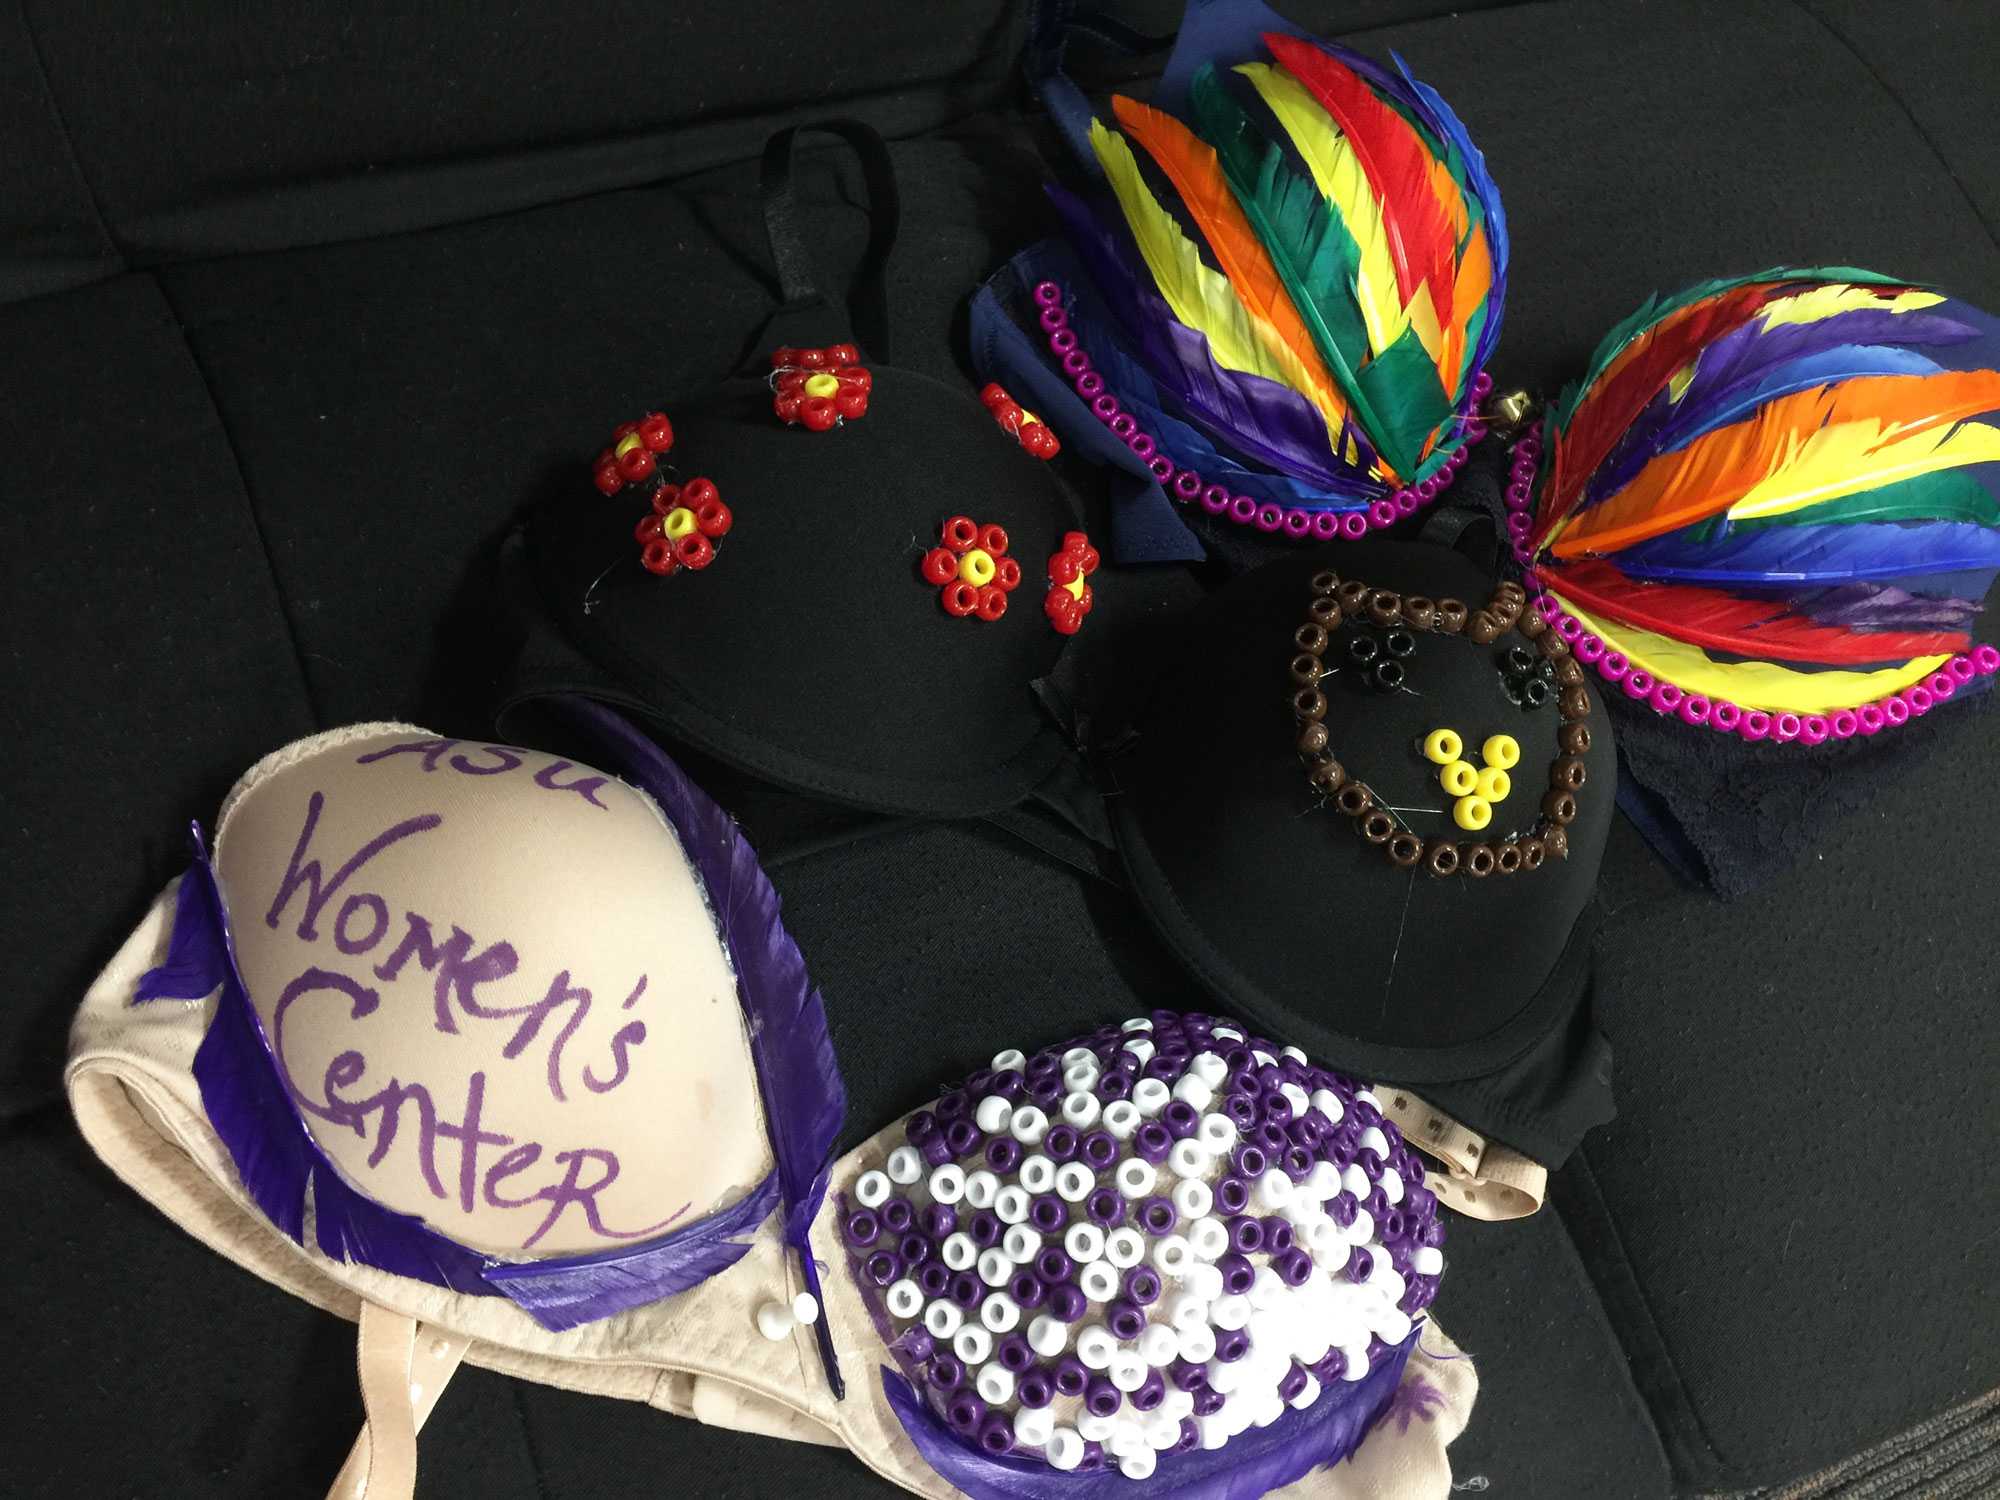 A couple of the bras that were decorated during the BraVa event. The bras will be on display at Luna Fest which is on April 6th and 7th. The event is a fundraising film festival to promote awareness about womens issues and appreciating women filmmakers. 